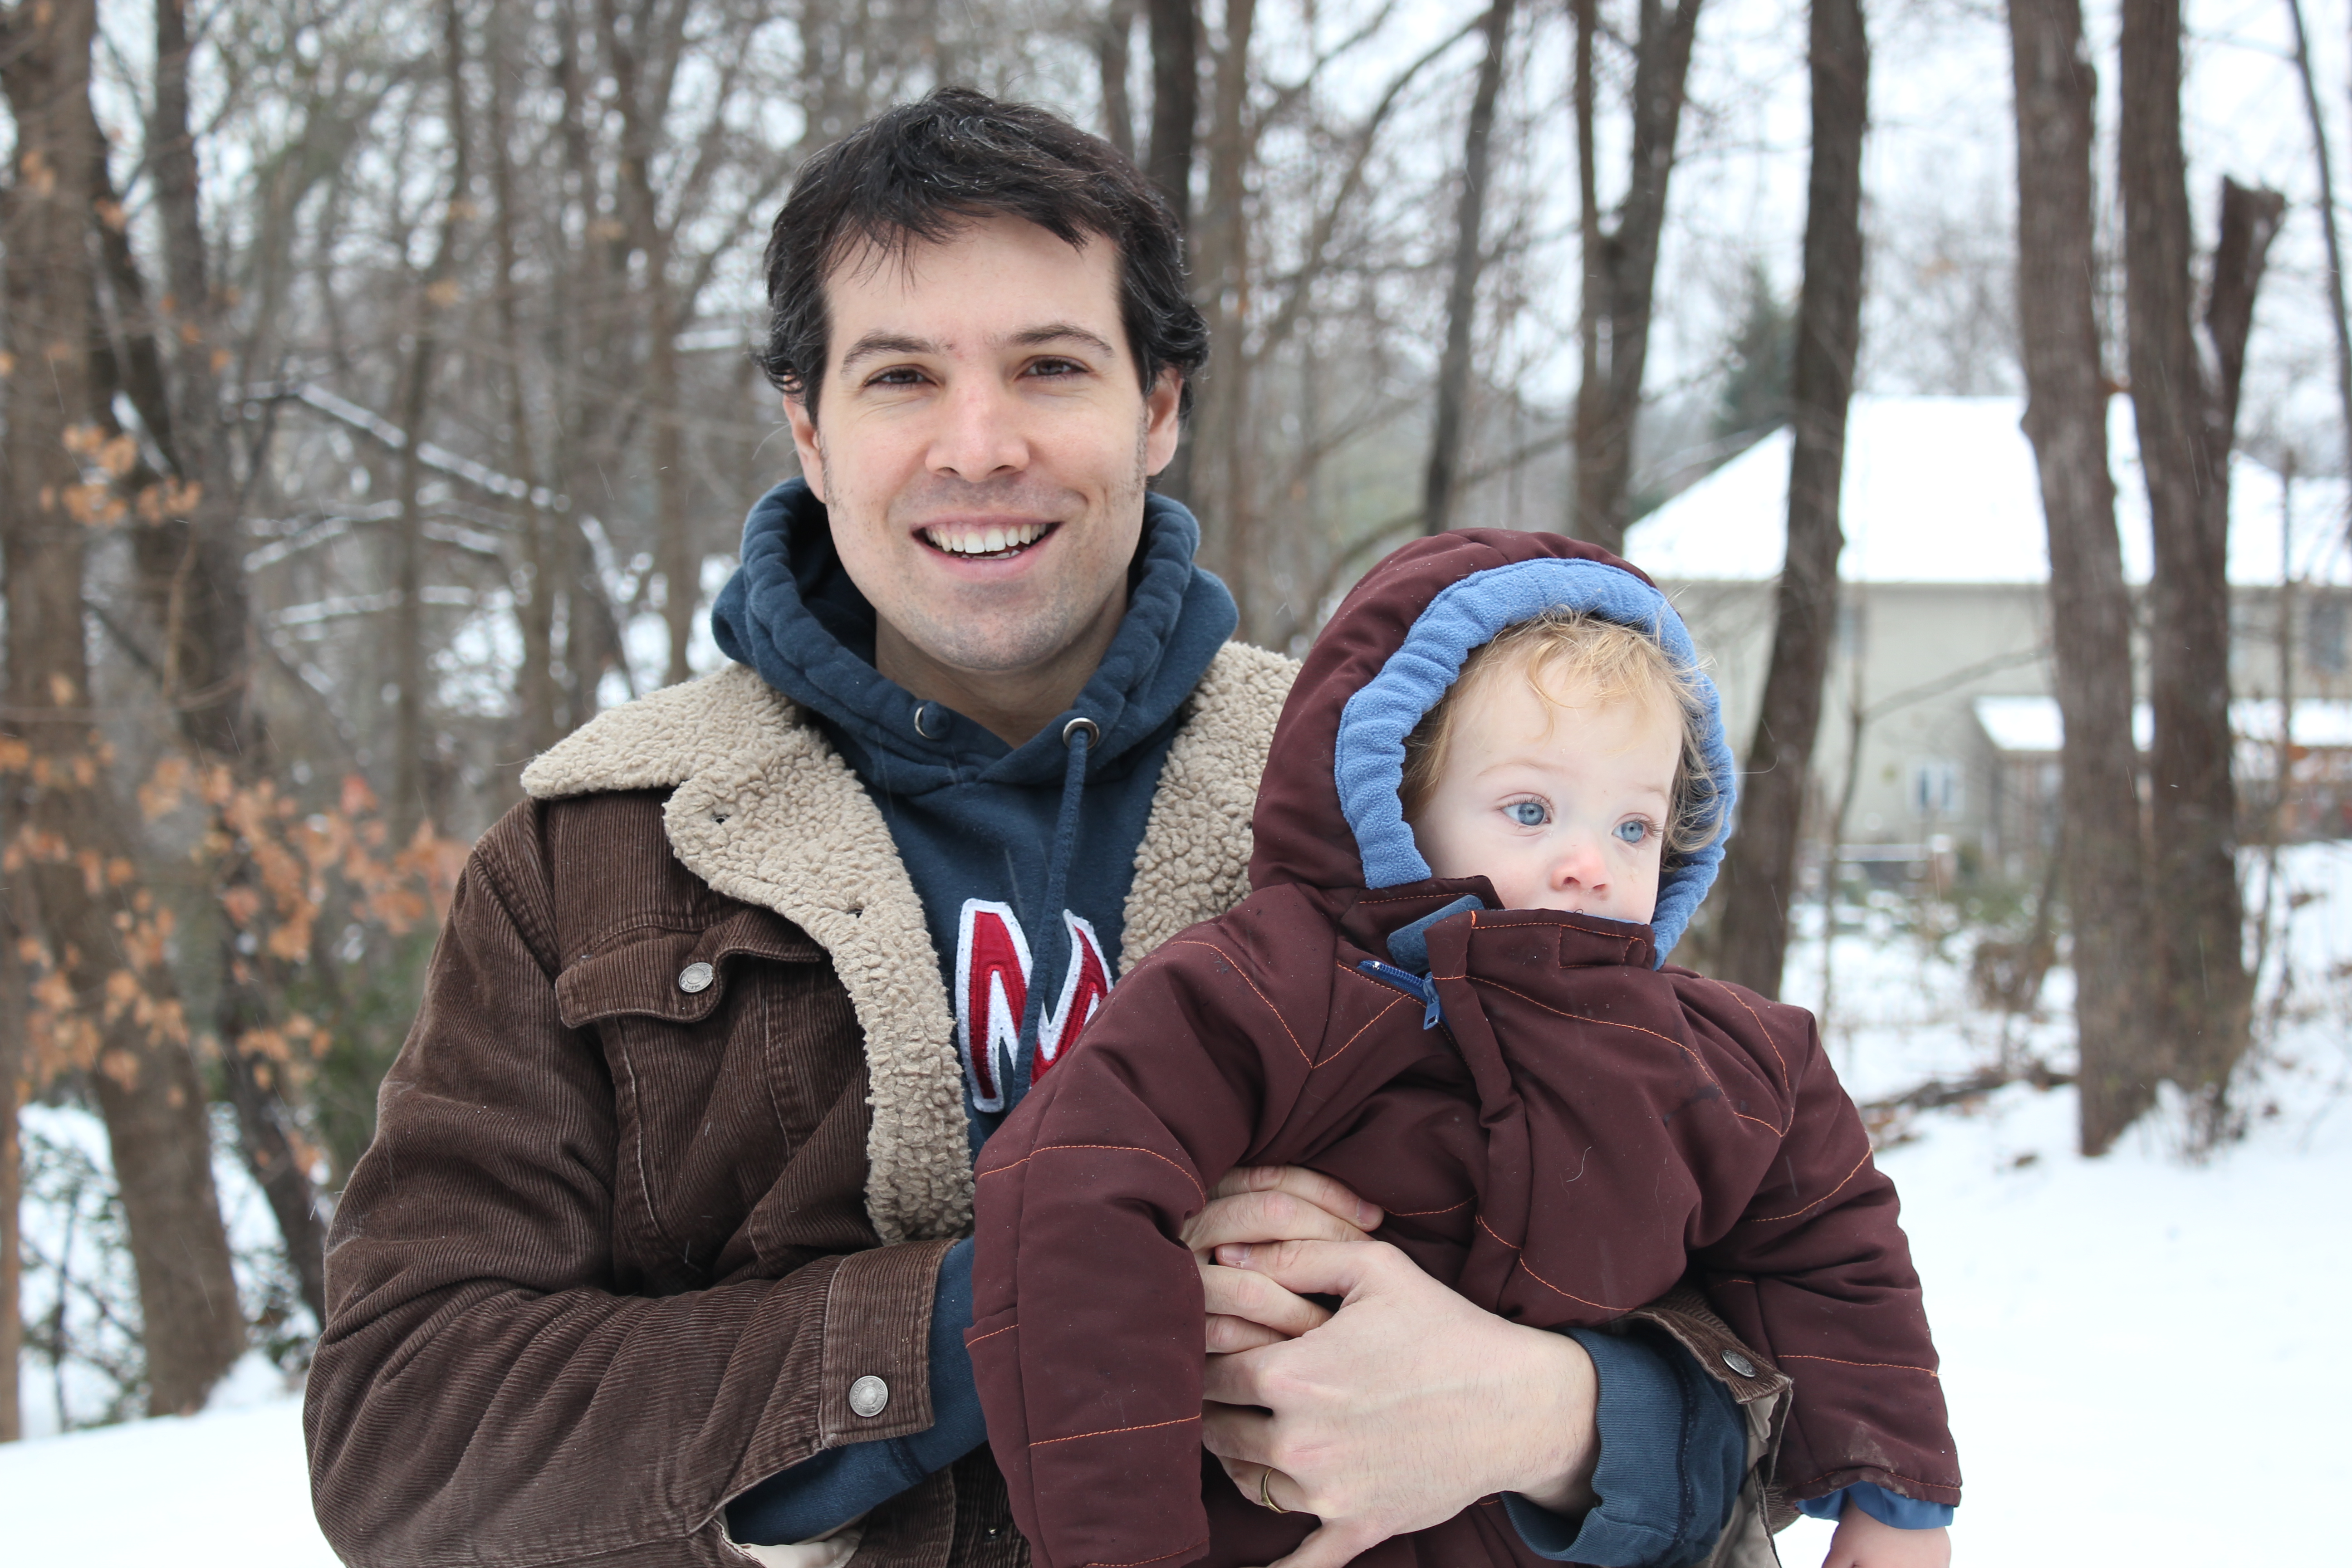 John outside his house in Virginia with his baby son Ivan Birmingham, December 2010.